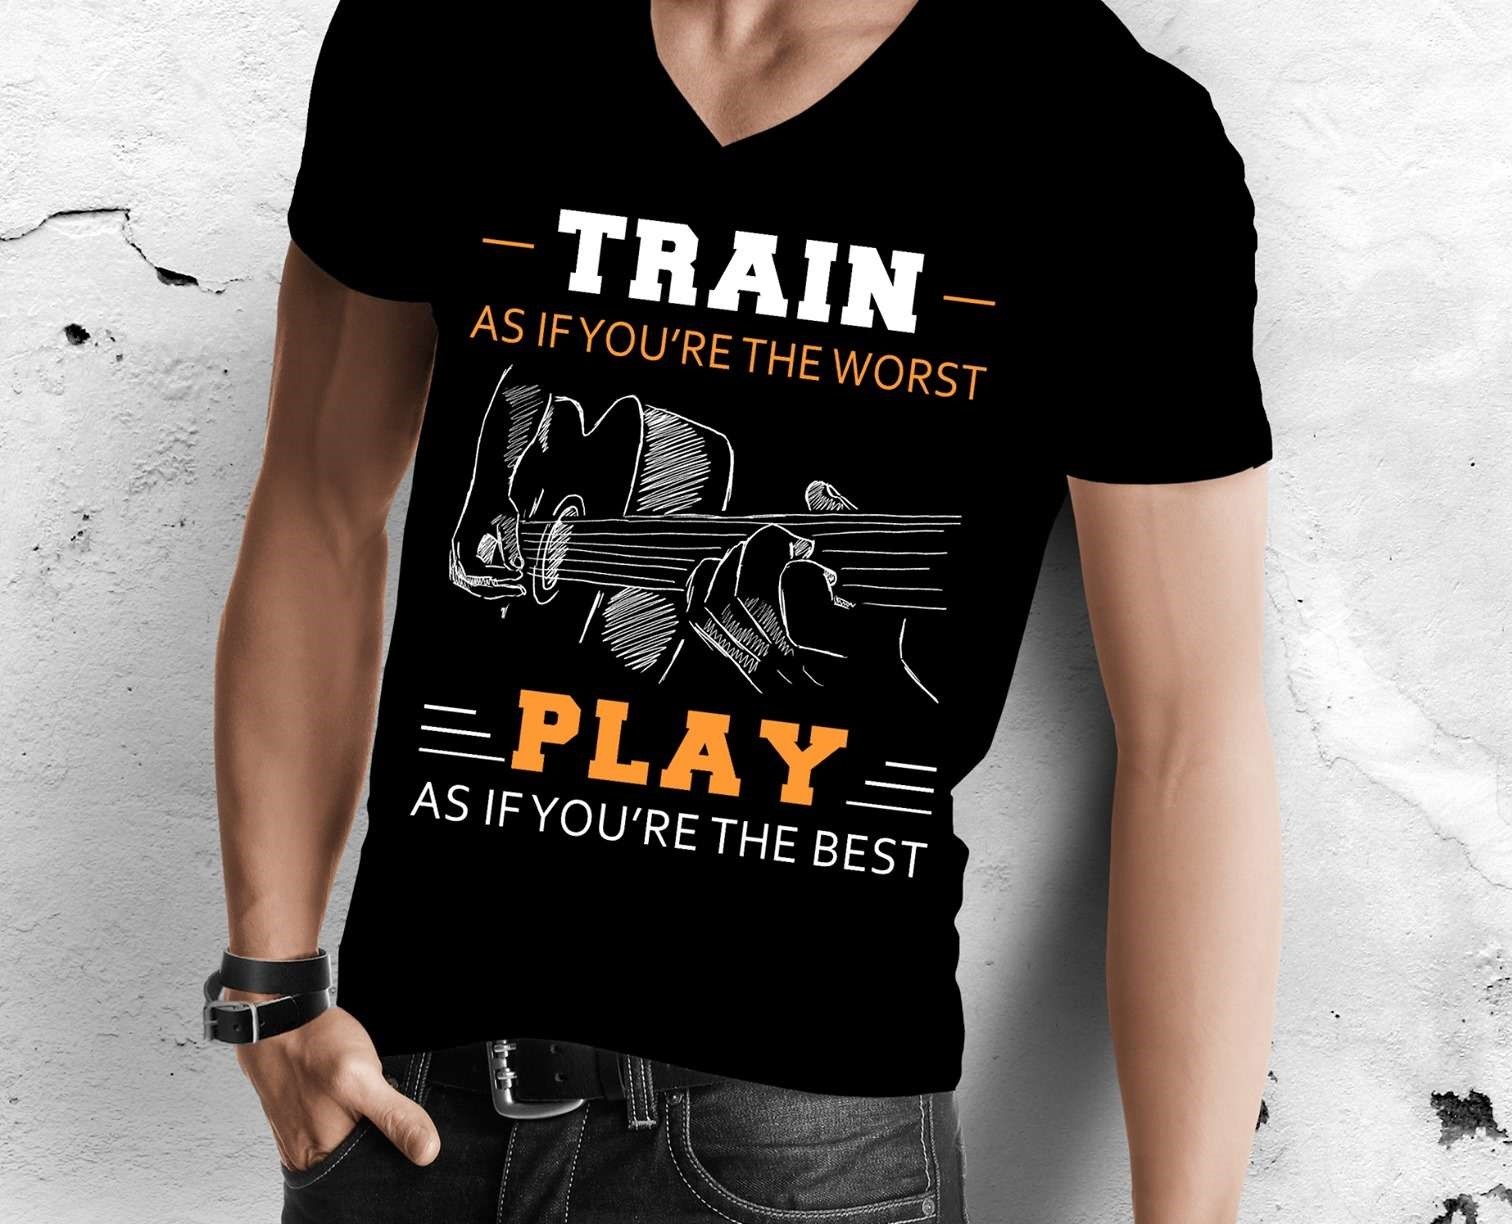 Train as if you're the worst play as if you're the best - Guitar training